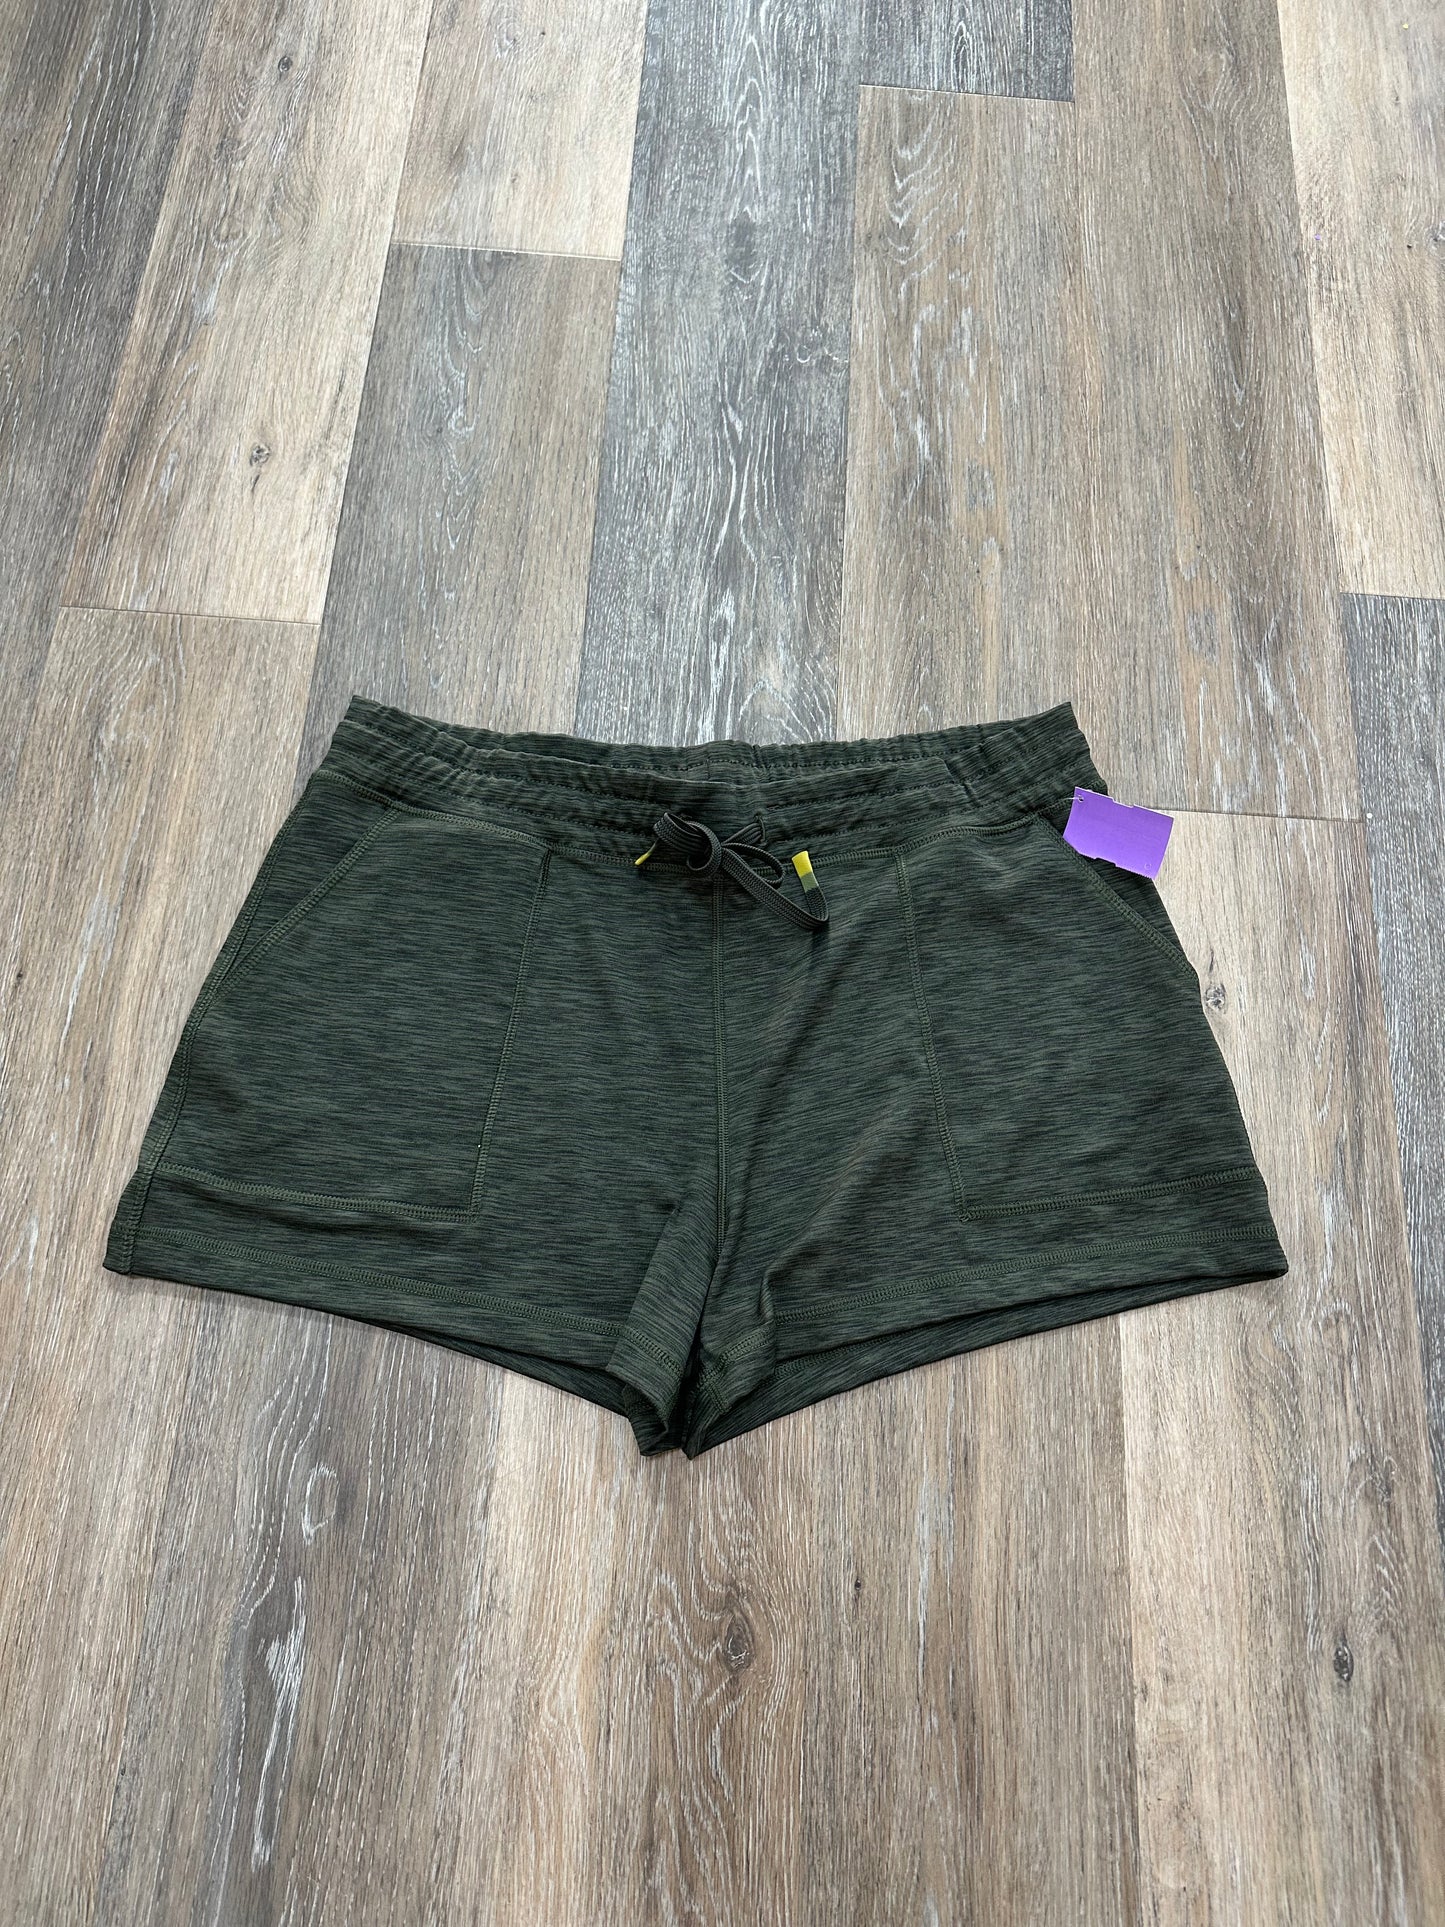 Athletic Shorts By Title Nine  Size: L